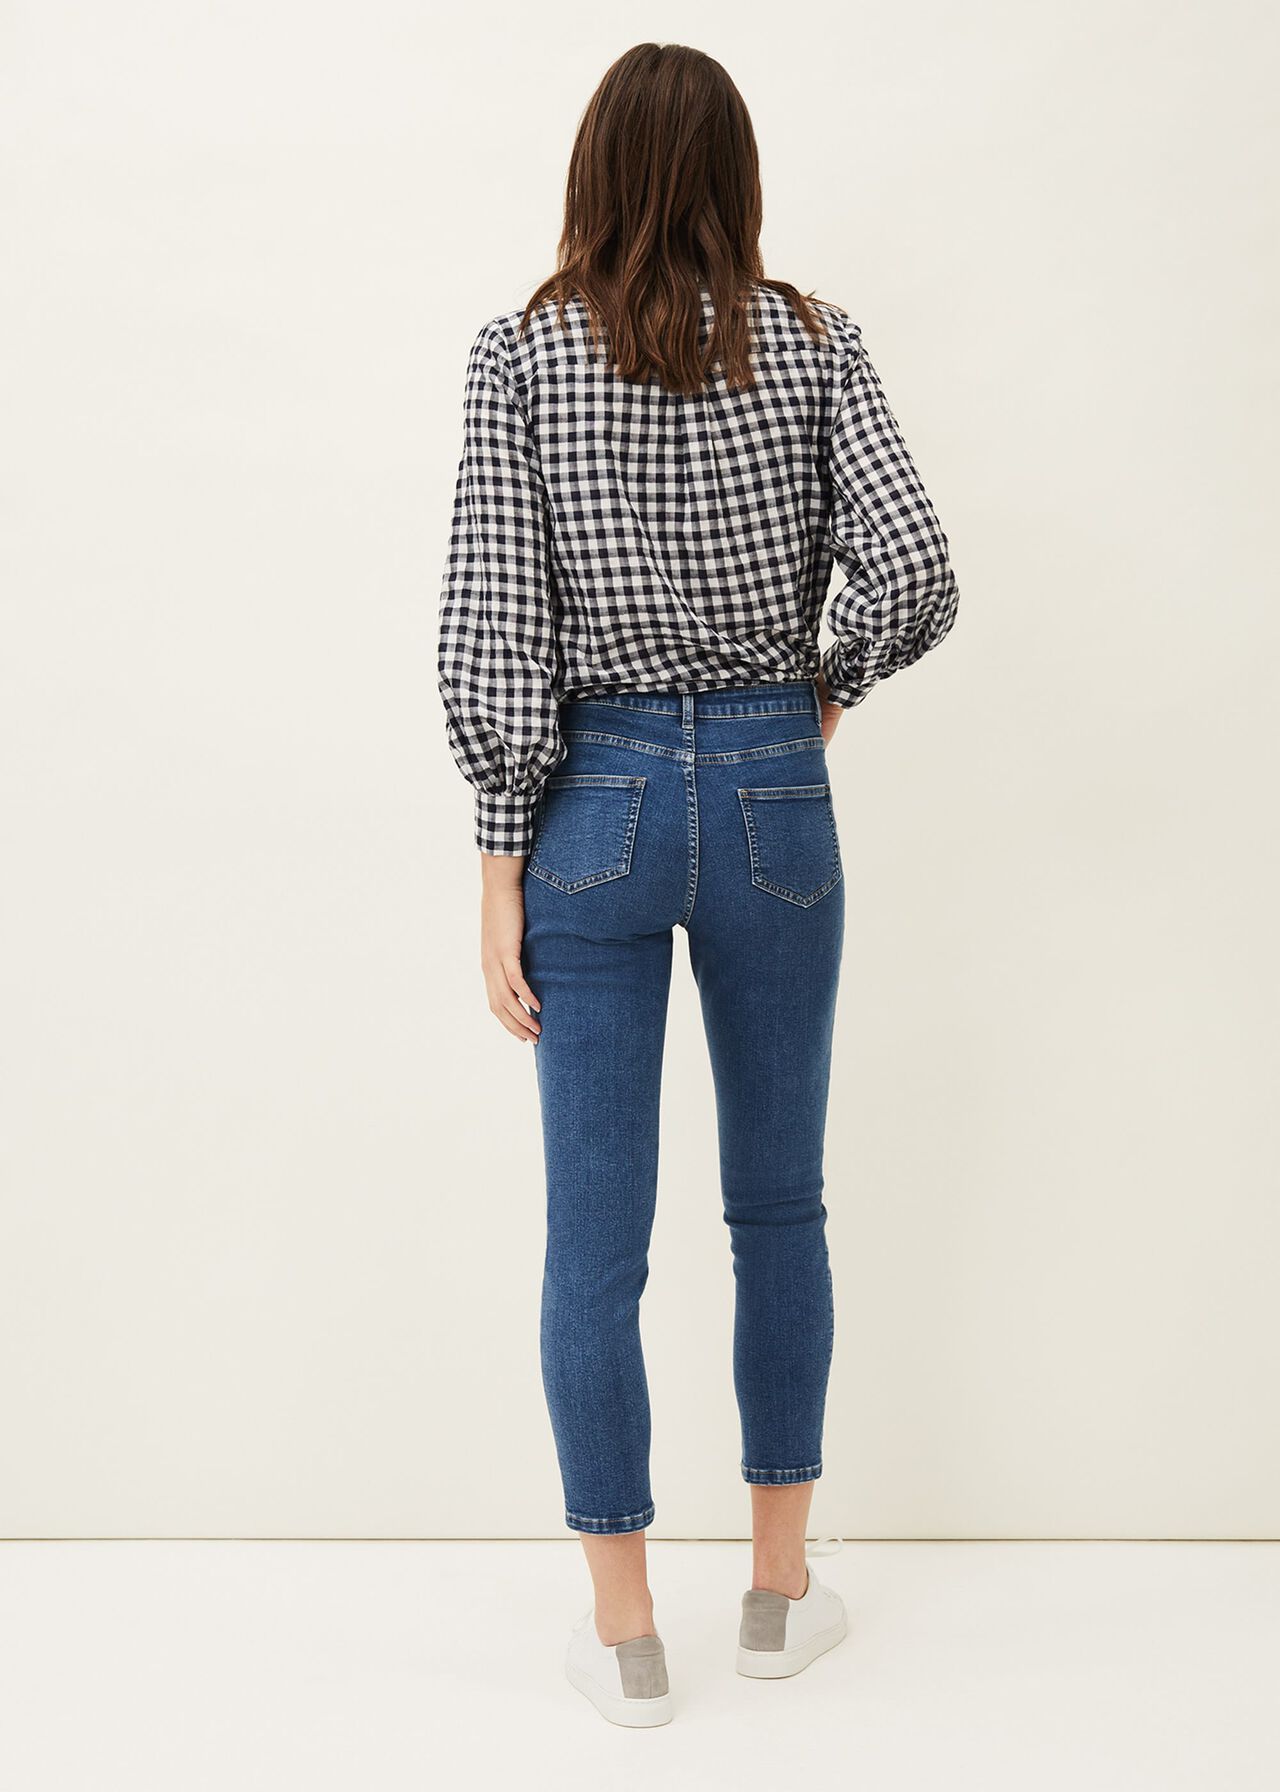 Pax Slim Fit Cropped Jeans